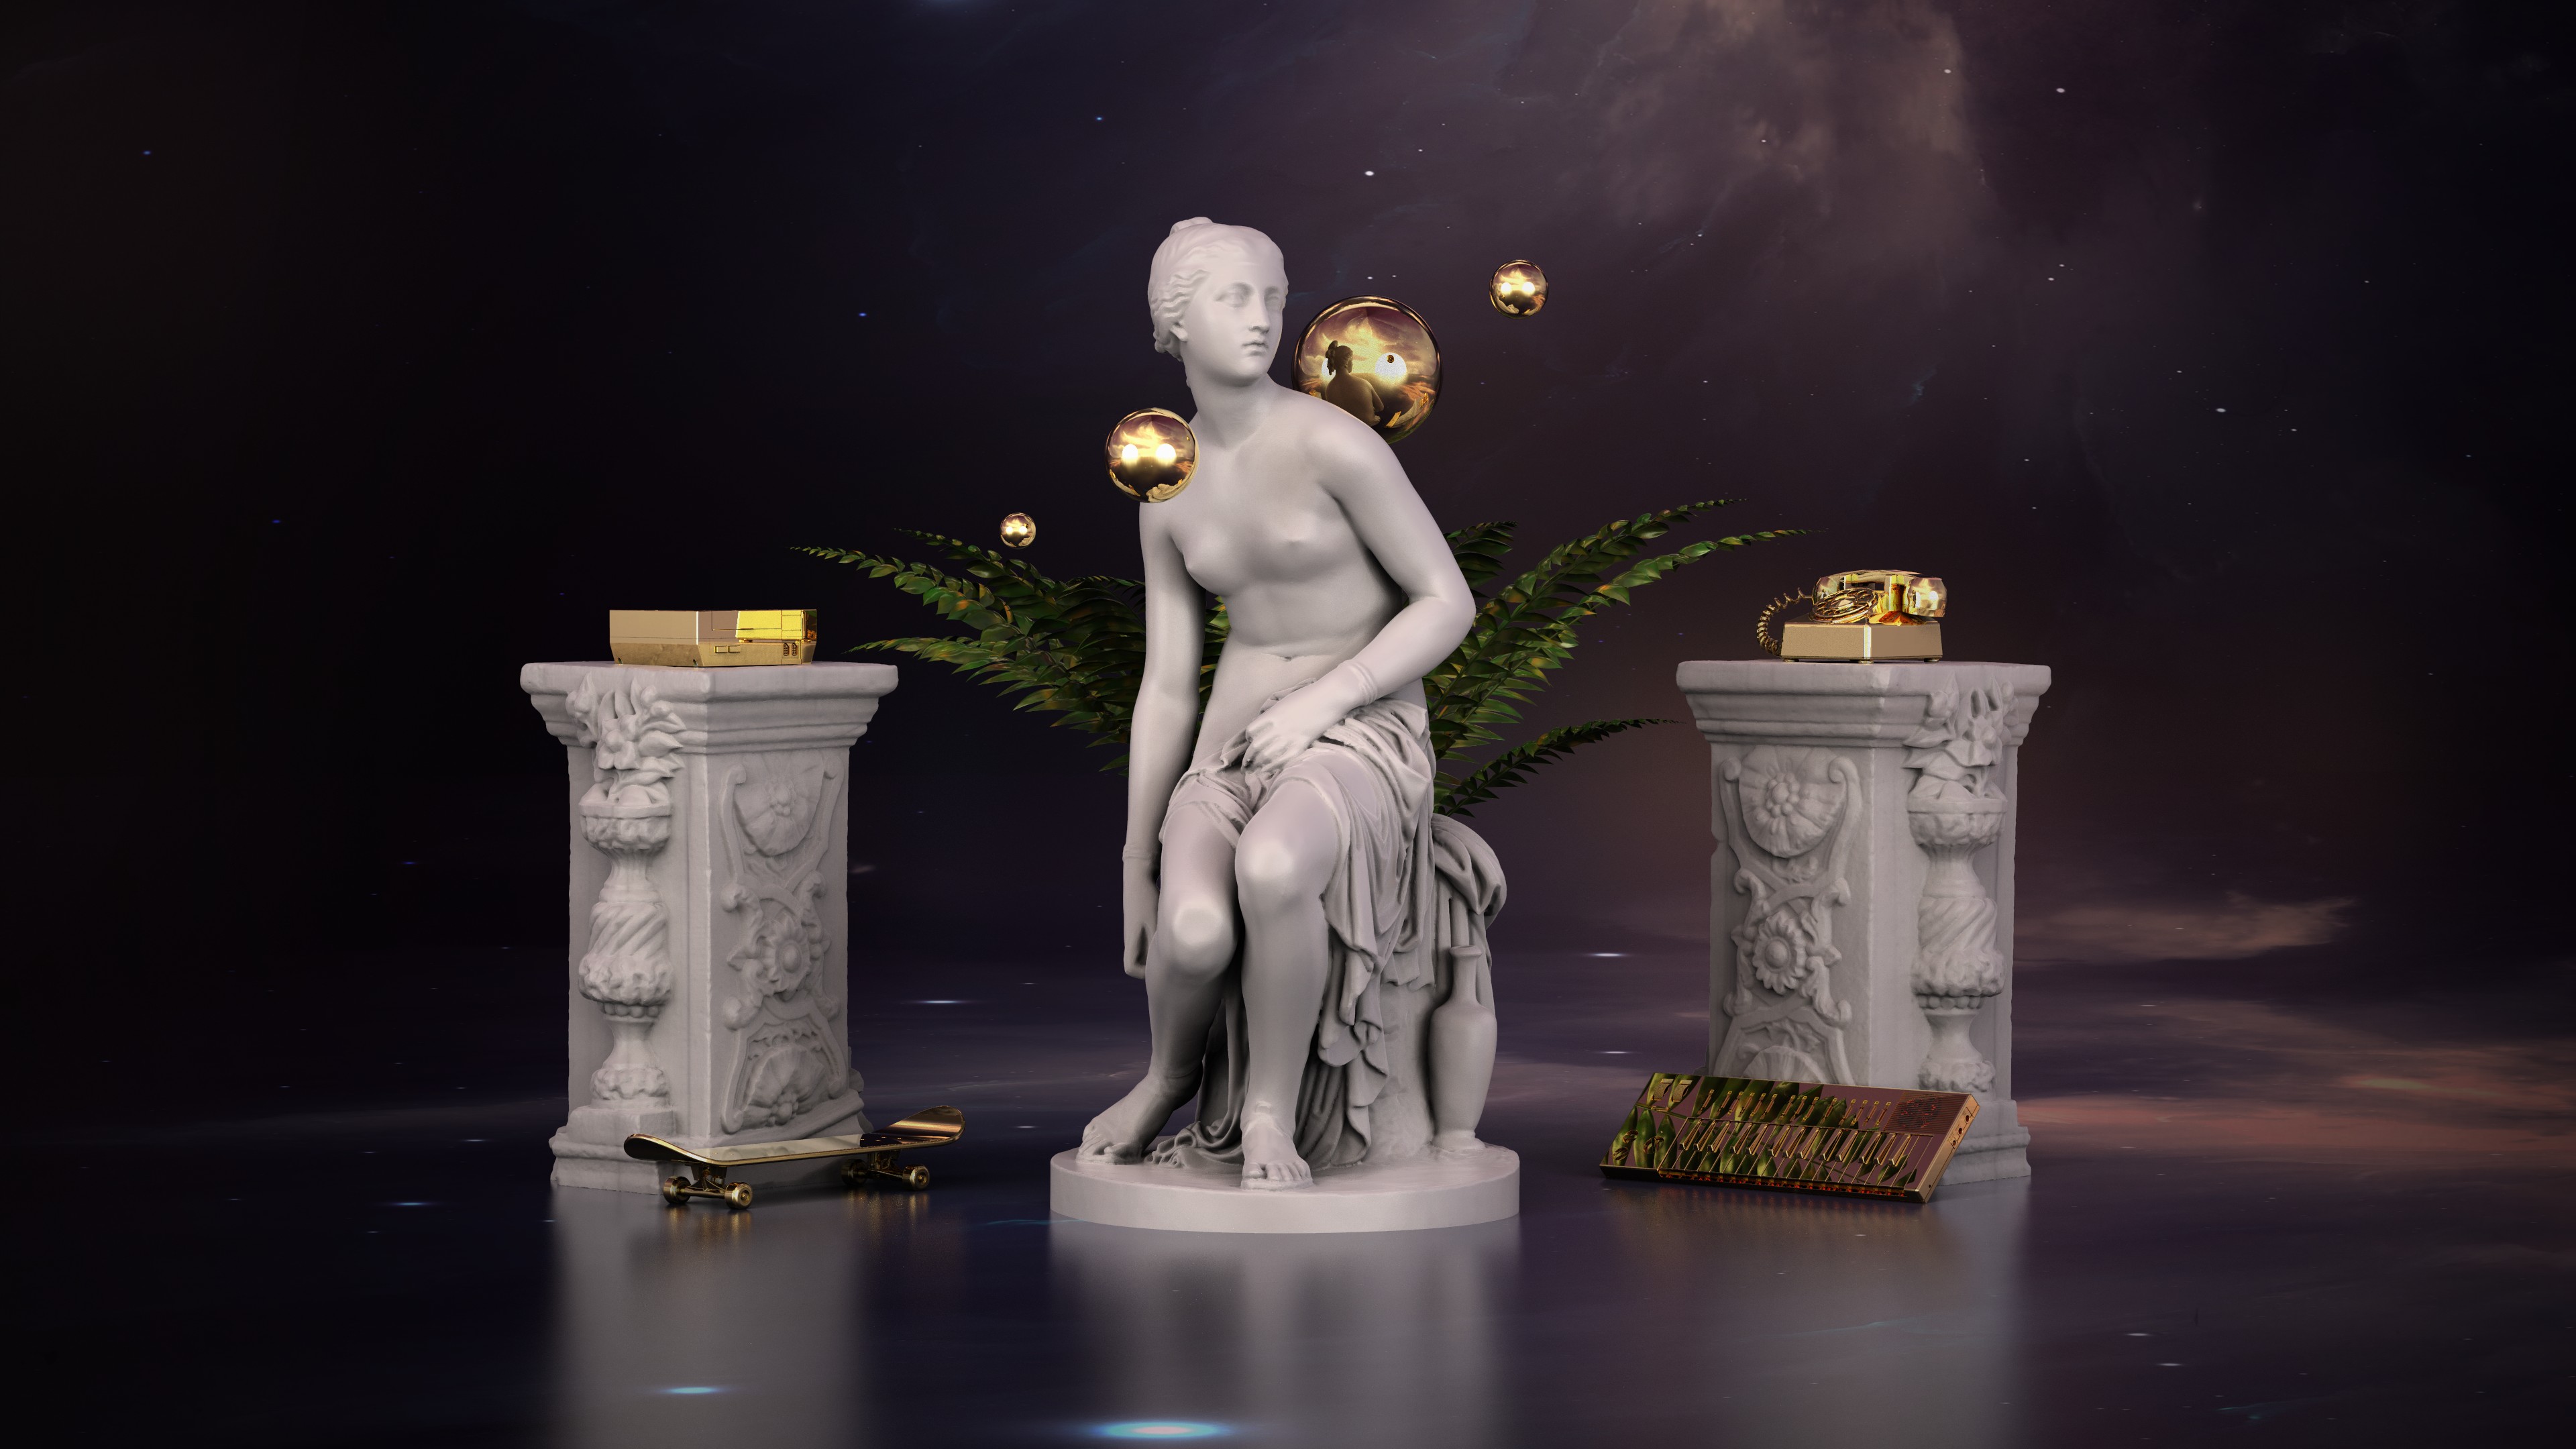 3D, Space, Marble, Gold, Nintendo Entertainment System, Skateboard, Piano, Synth, Phone, Statue, Ferns Wallpaper